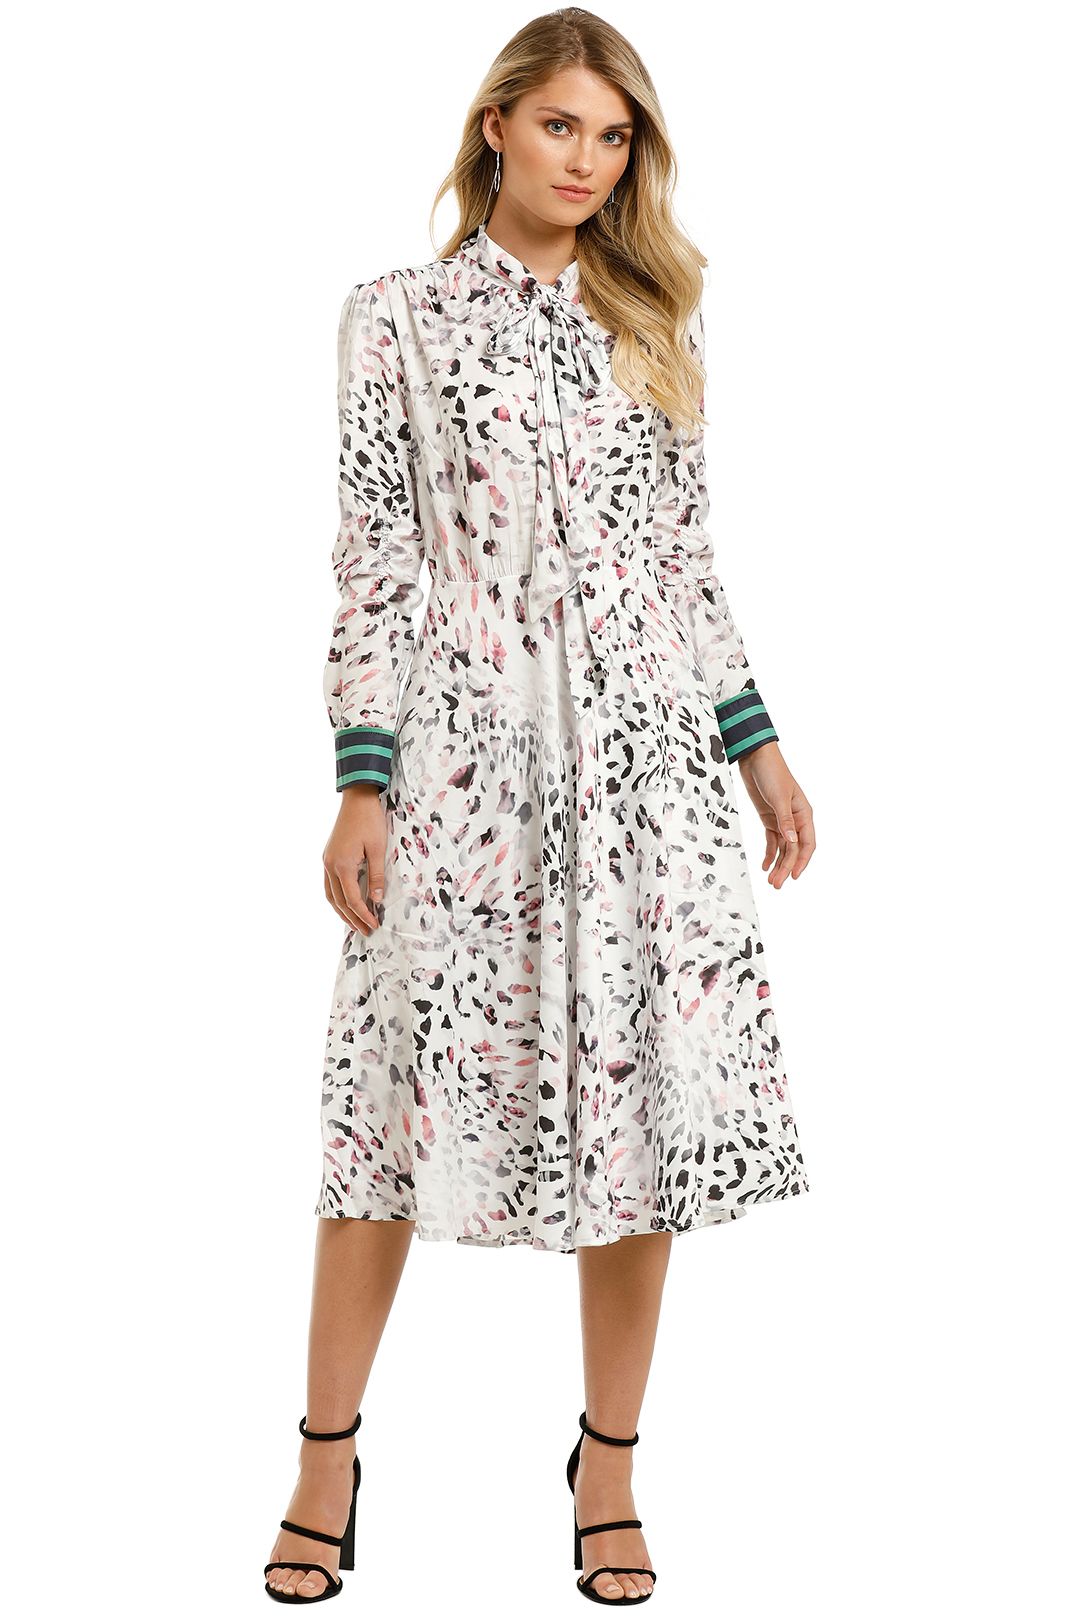 Grace-Willow-River-Dress-Silver-Leopard-Front